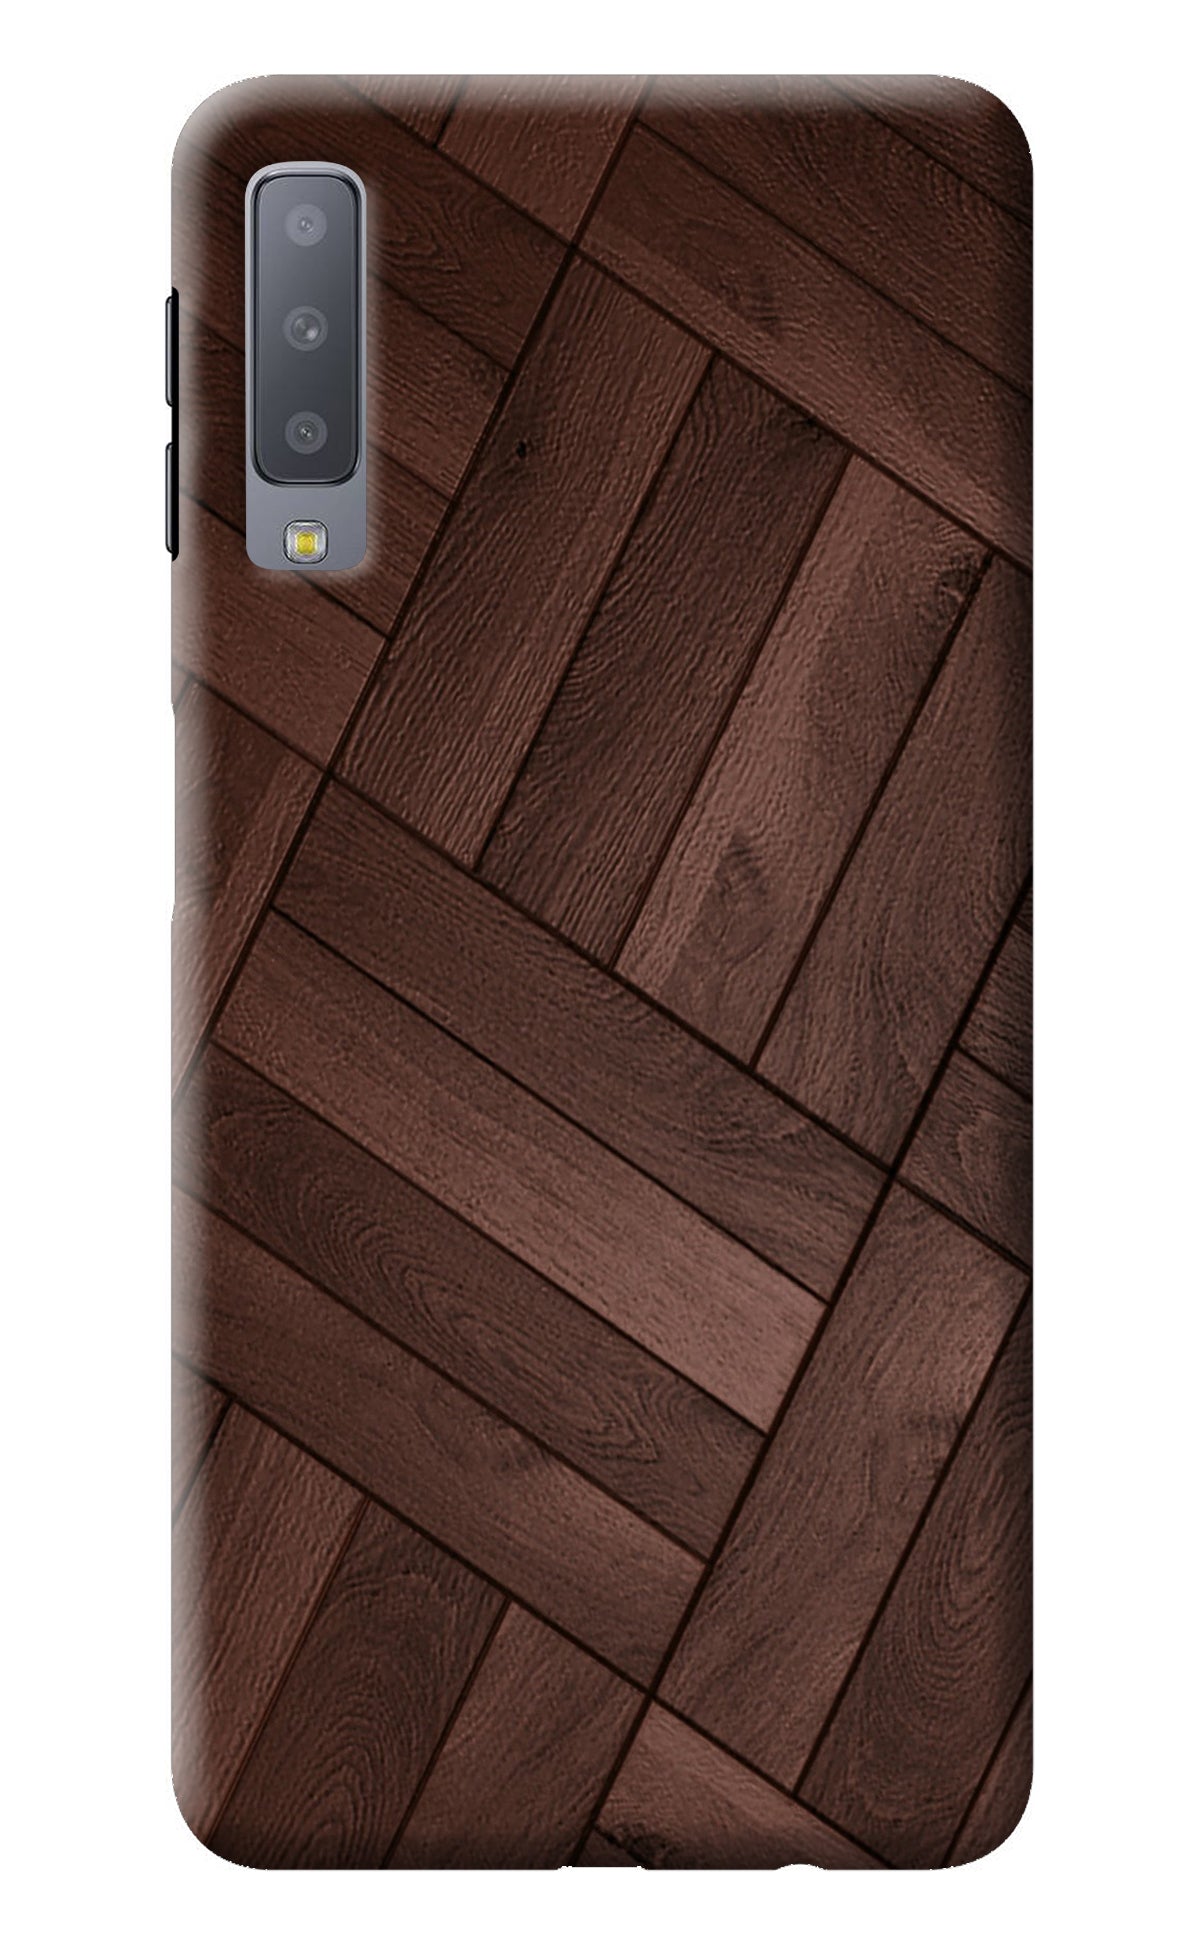 Wooden Texture Design Samsung A7 Back Cover